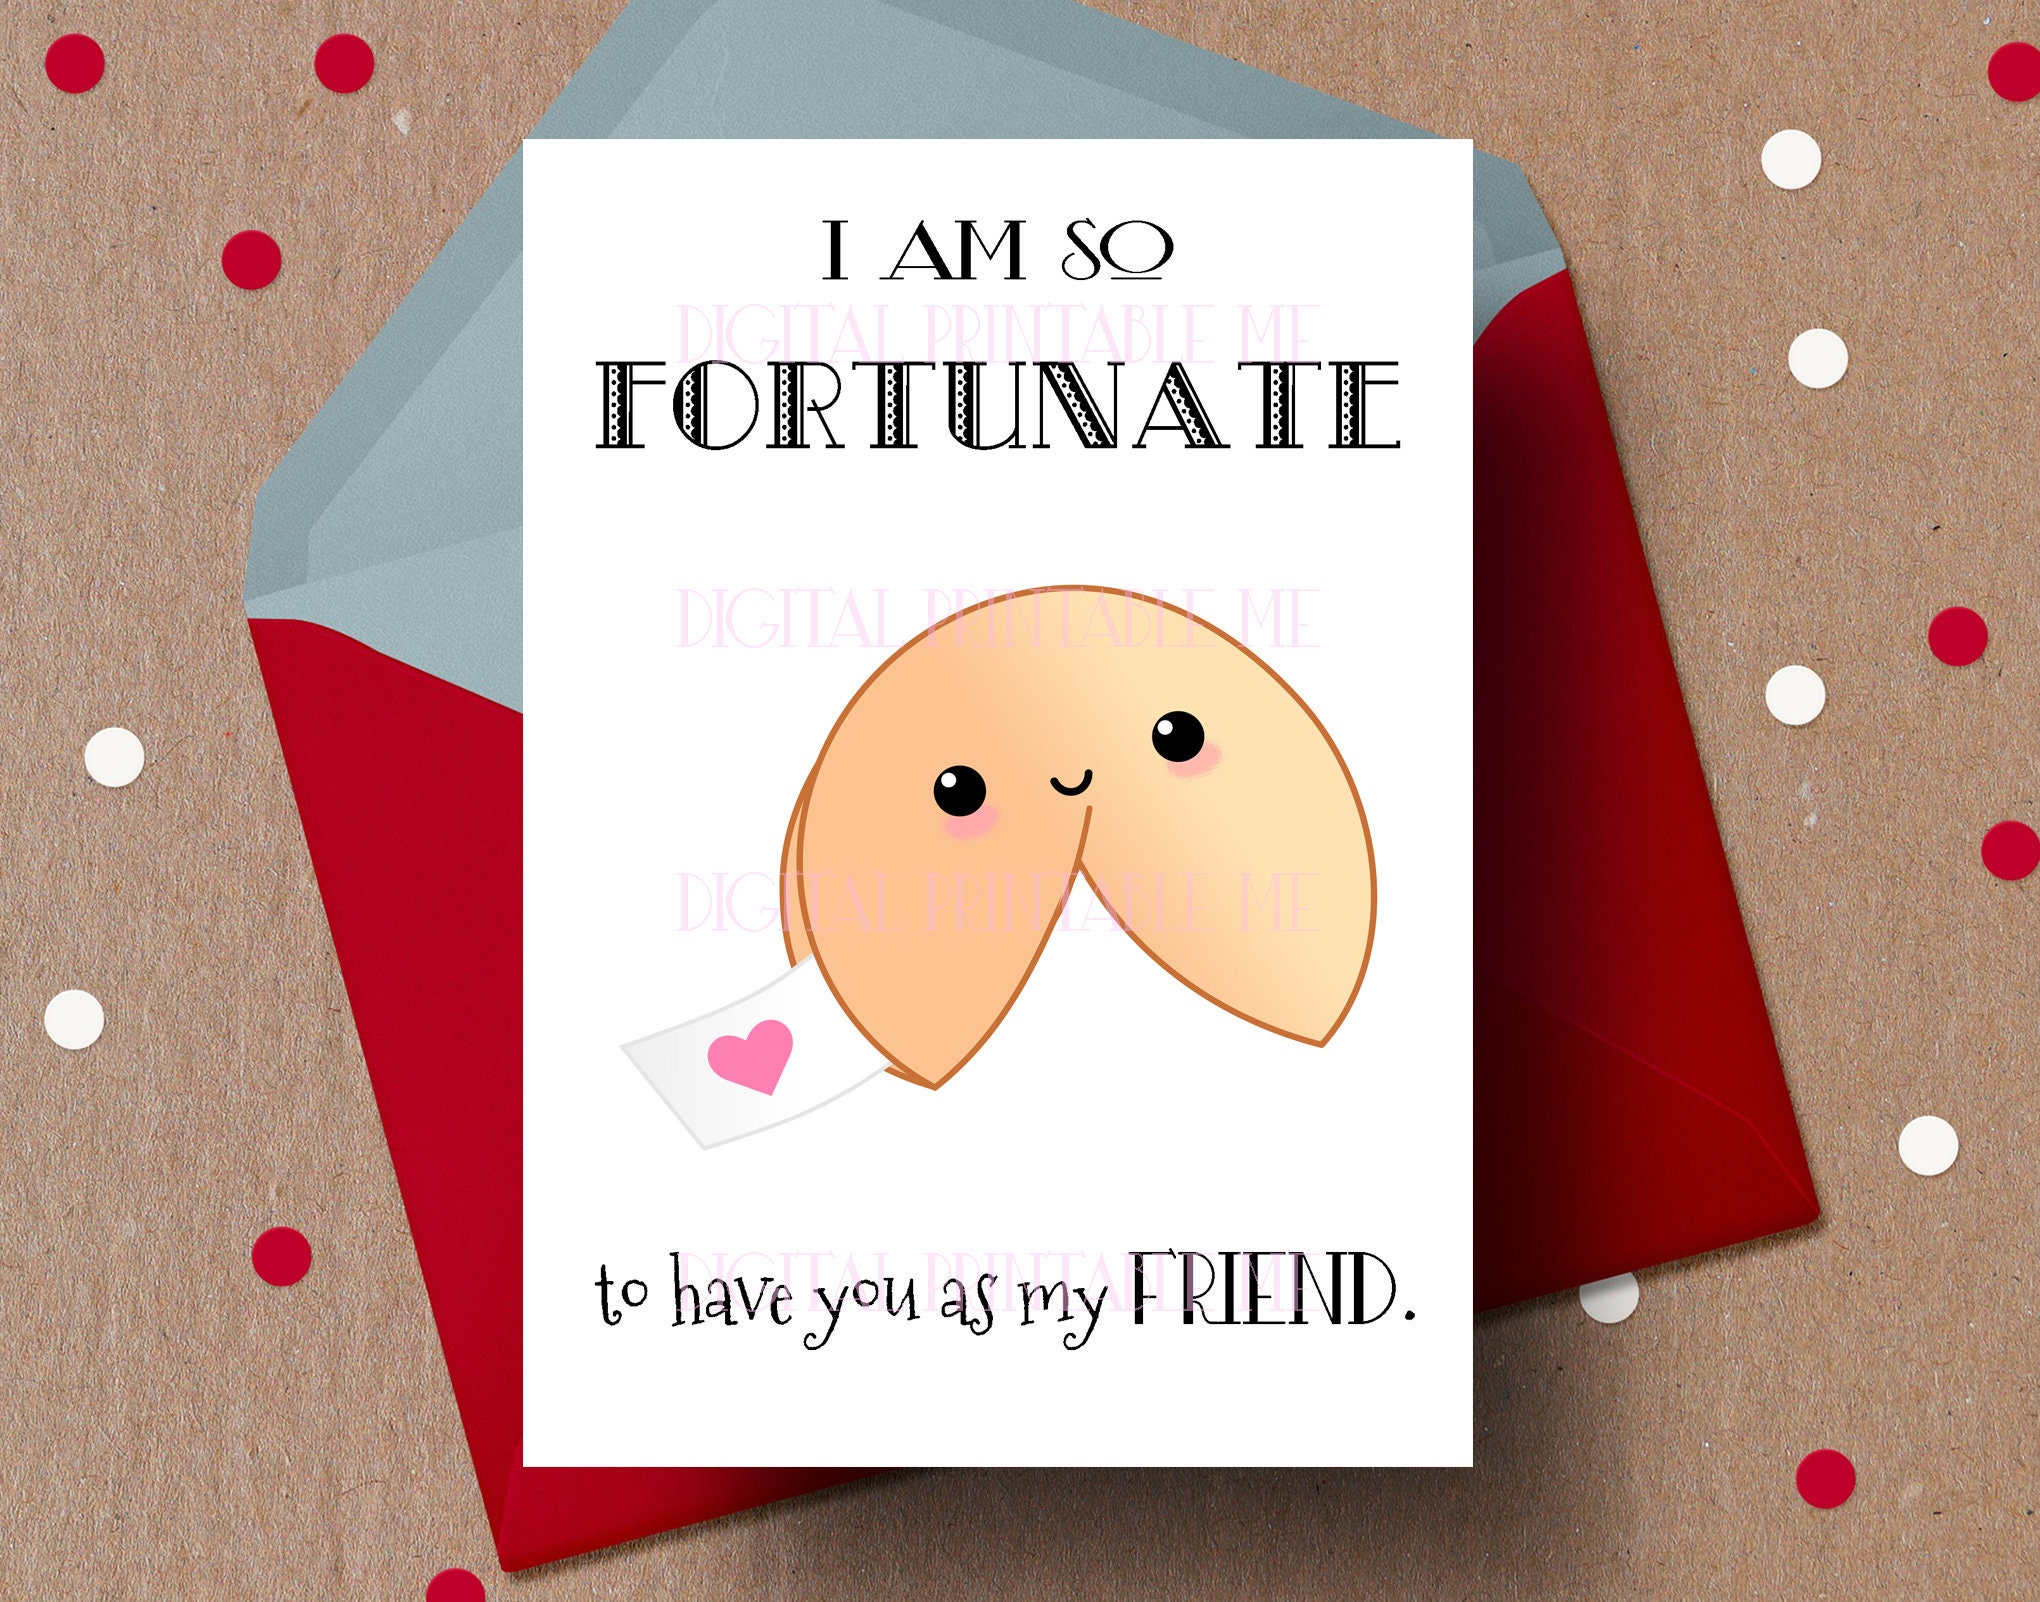 Funny valentines day cards for friends